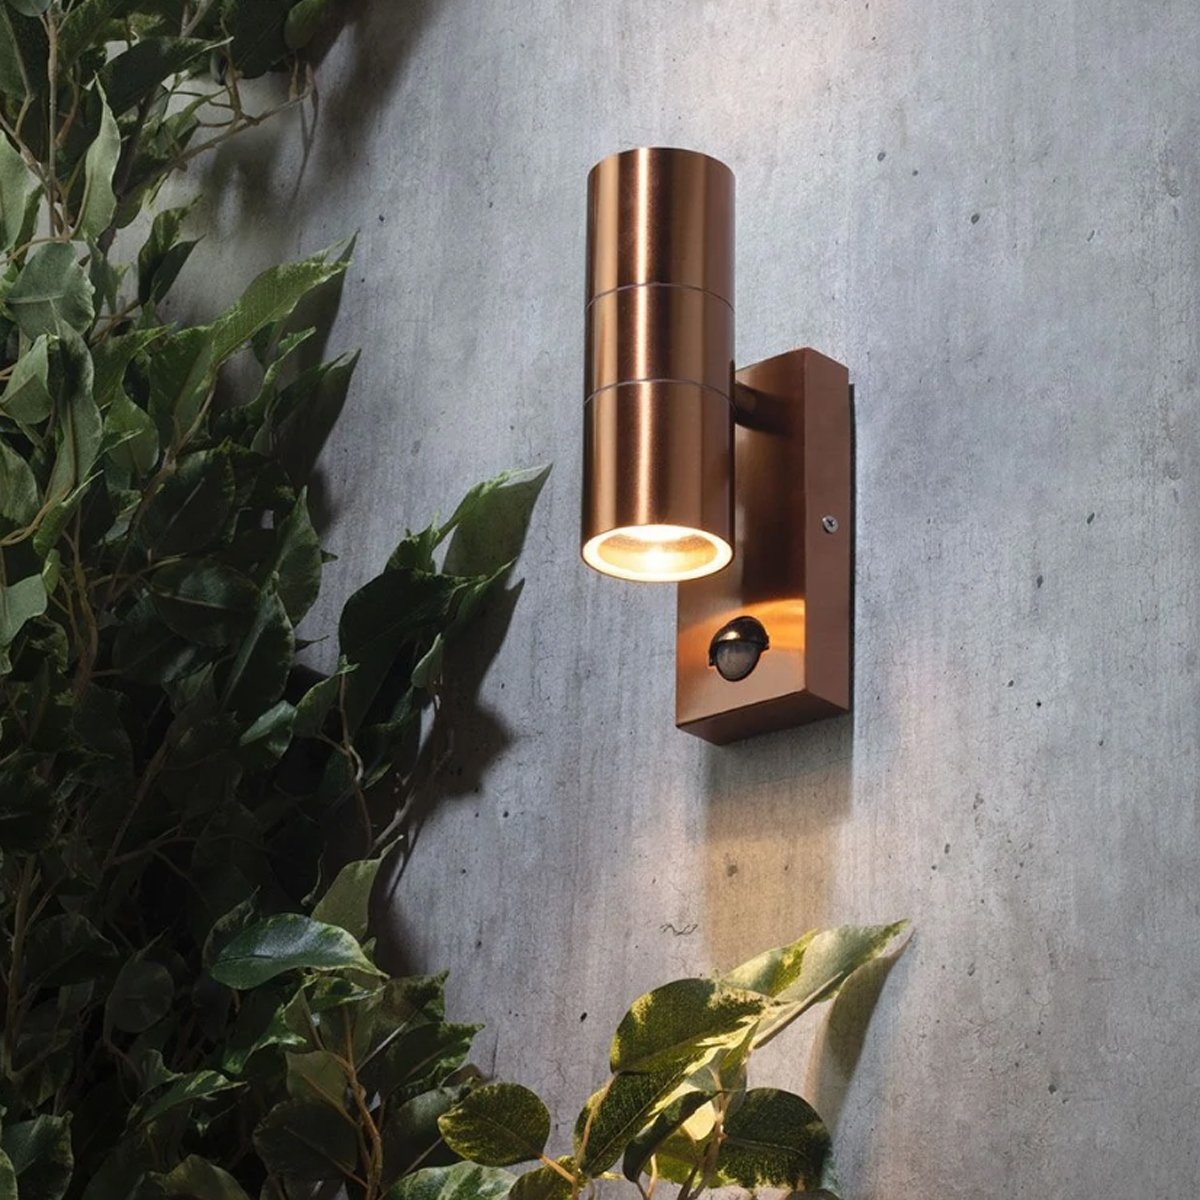 Dual Outdoor Wall Light With Motion Sensor Copper – CGC Retail Outlet